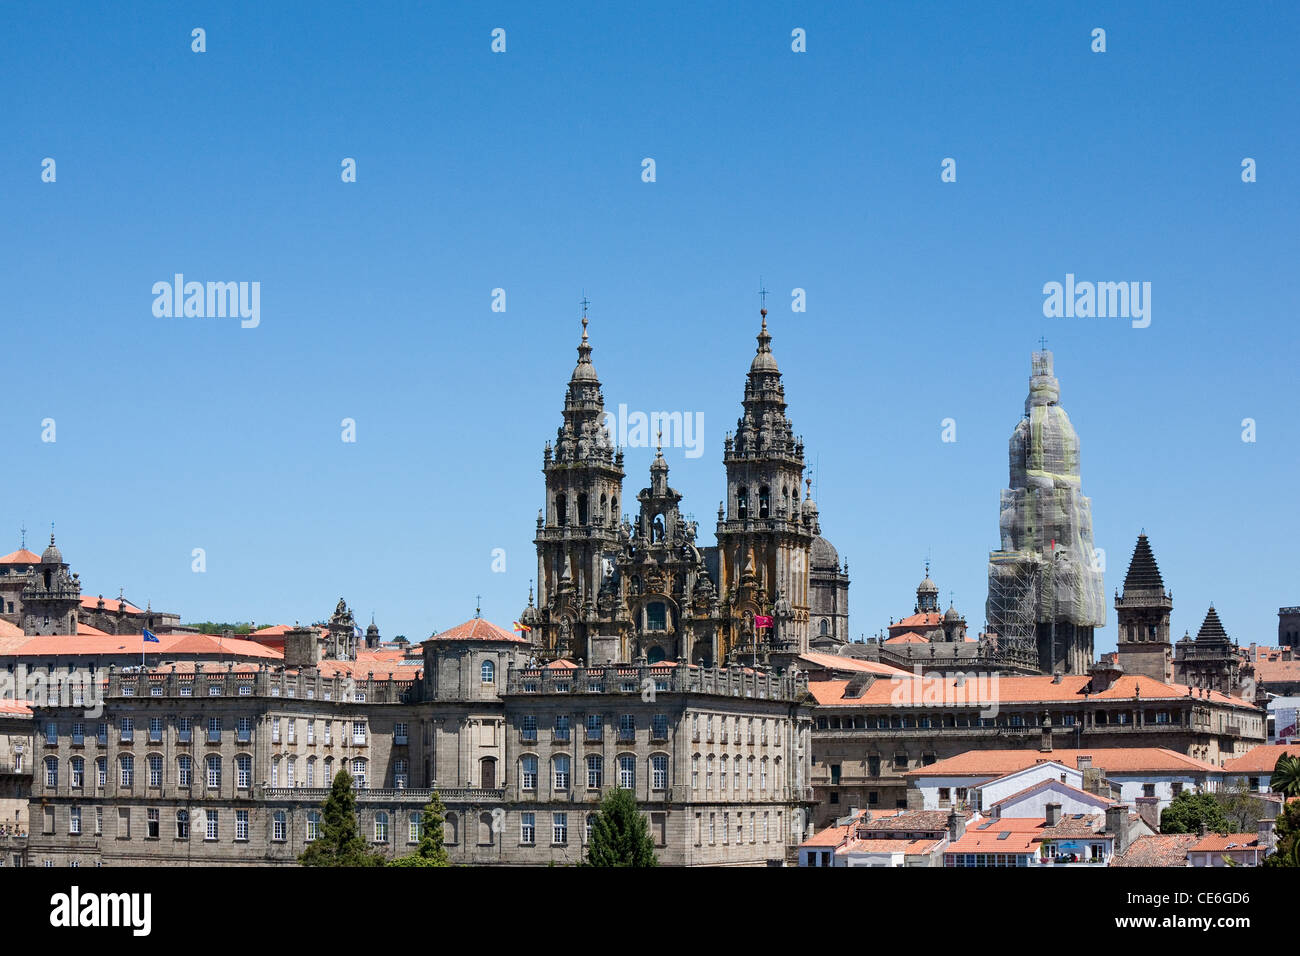 View of old town Santiago de Compostela and the cathedral from Alameda Park - Santiago de Compostela, Galicia, Spain Stock Photo